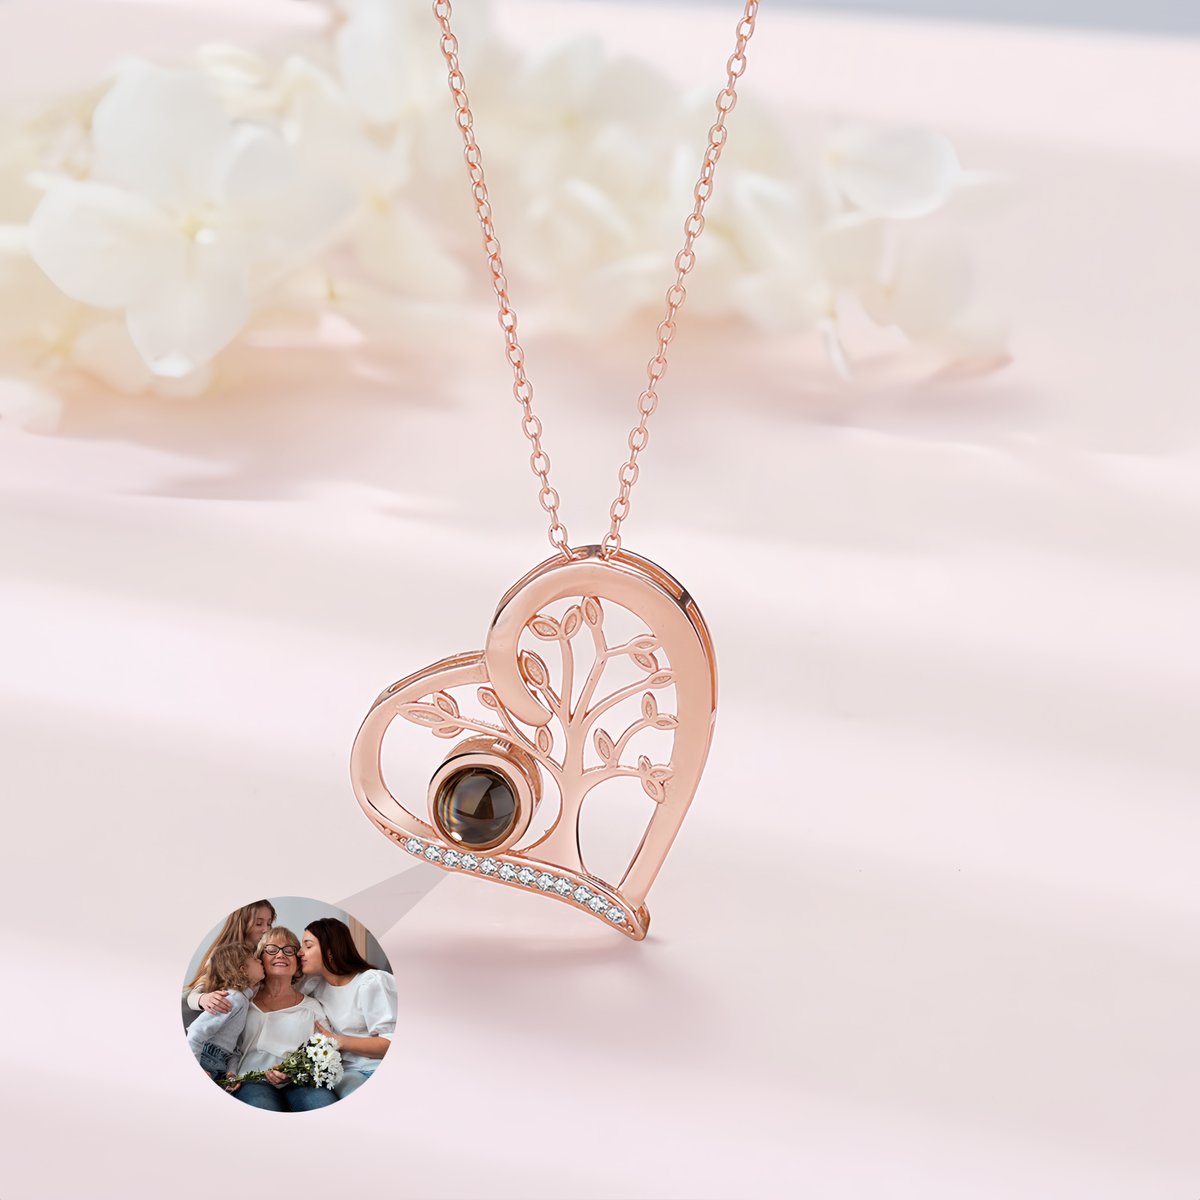 🎁Looking for the perfect Mother‘s Day gift? 
💖Our customized PROJECTION NECKLACE is a heartwarming choice!

✨Make memories last forever. 

#motherdaygift #giftformom #motherdaughterlove #projectionnecklace #necklaceoftheday #trendollajewelry